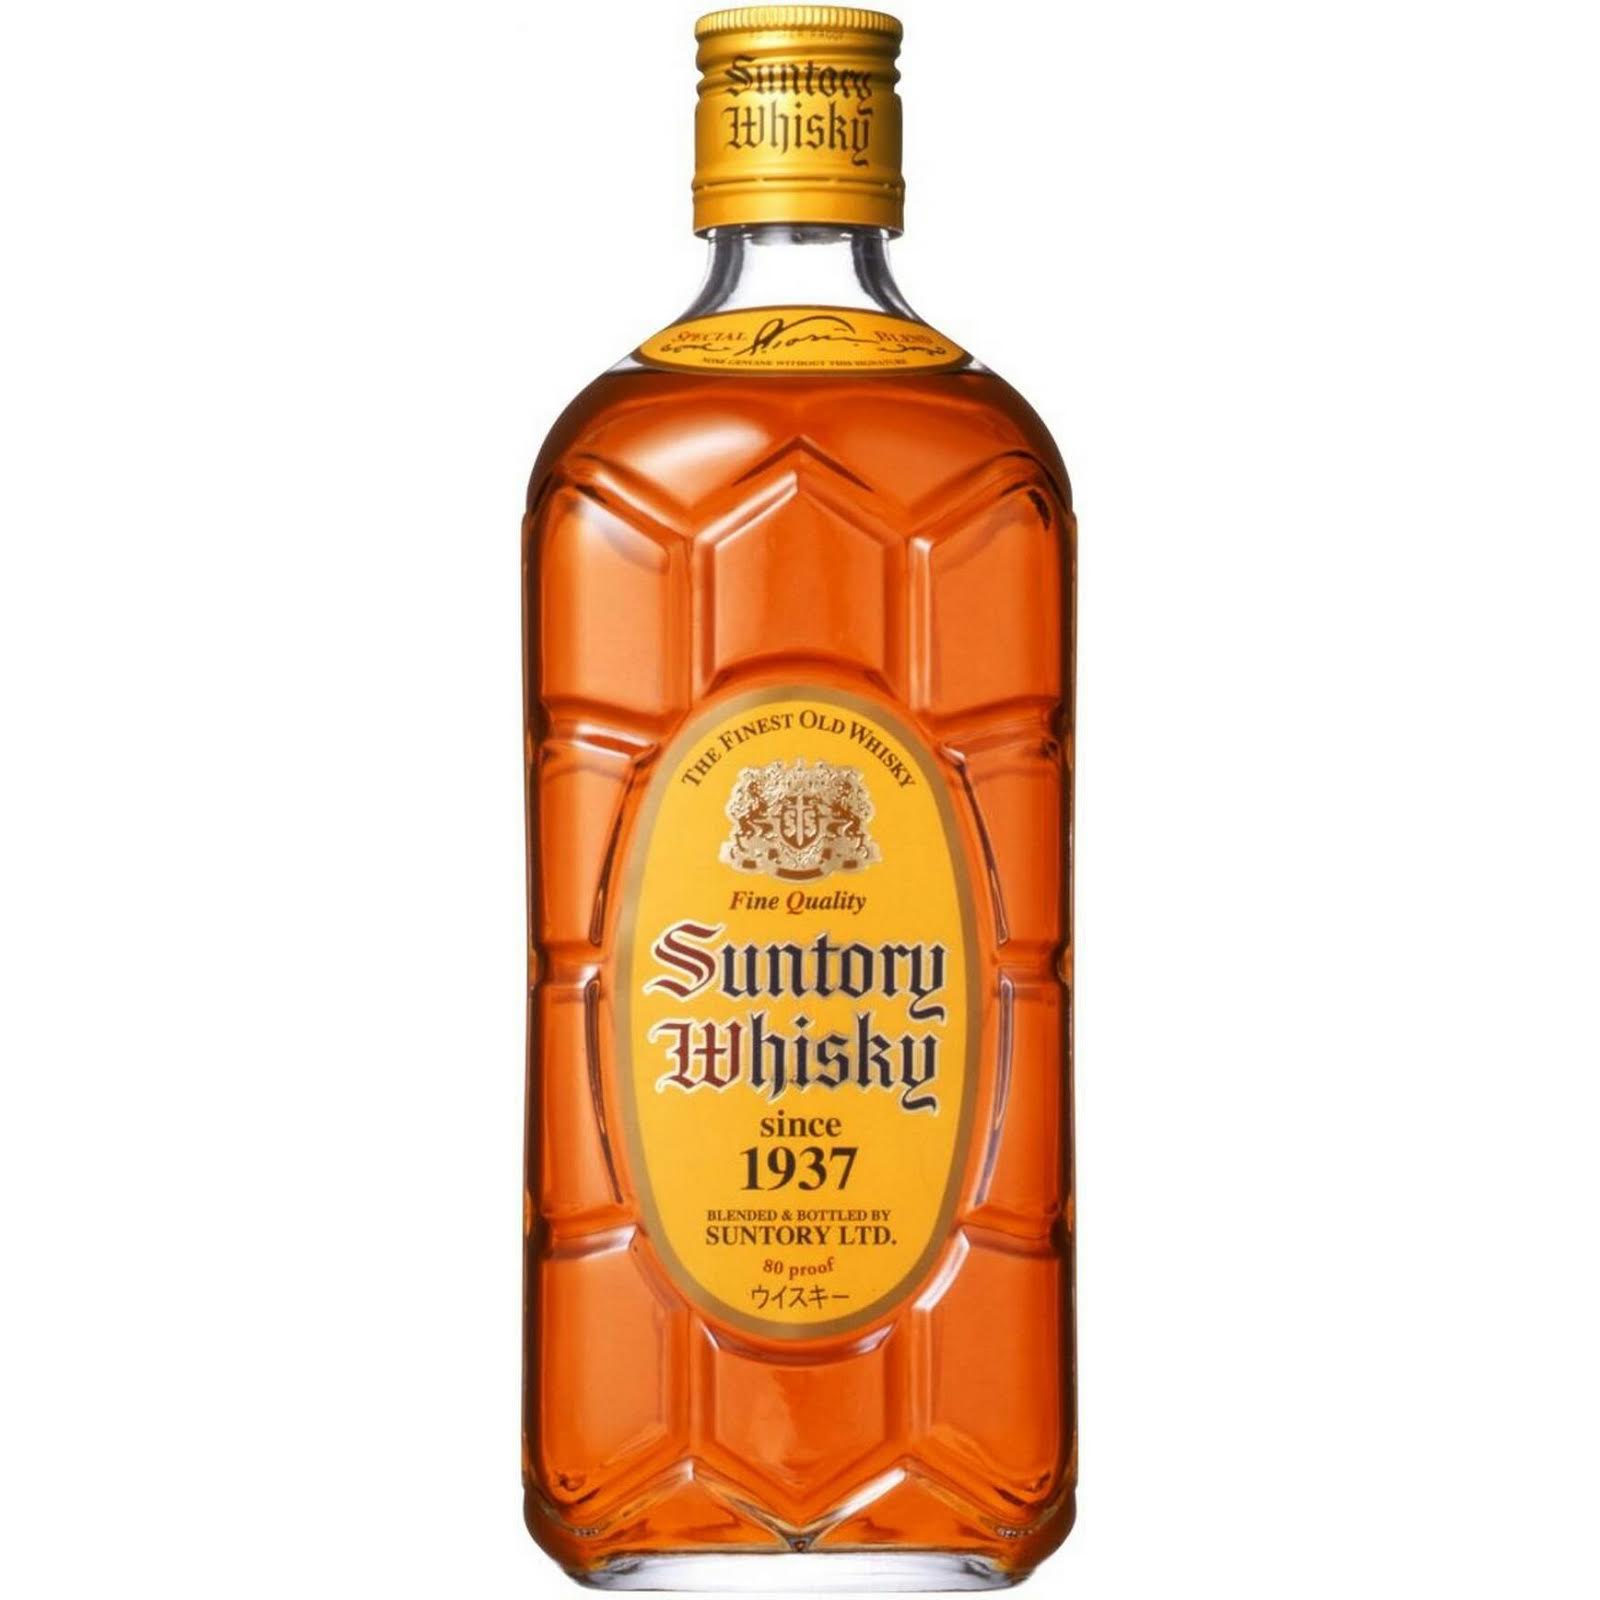 Place to buy Suntory products online - japan-guide.com forum